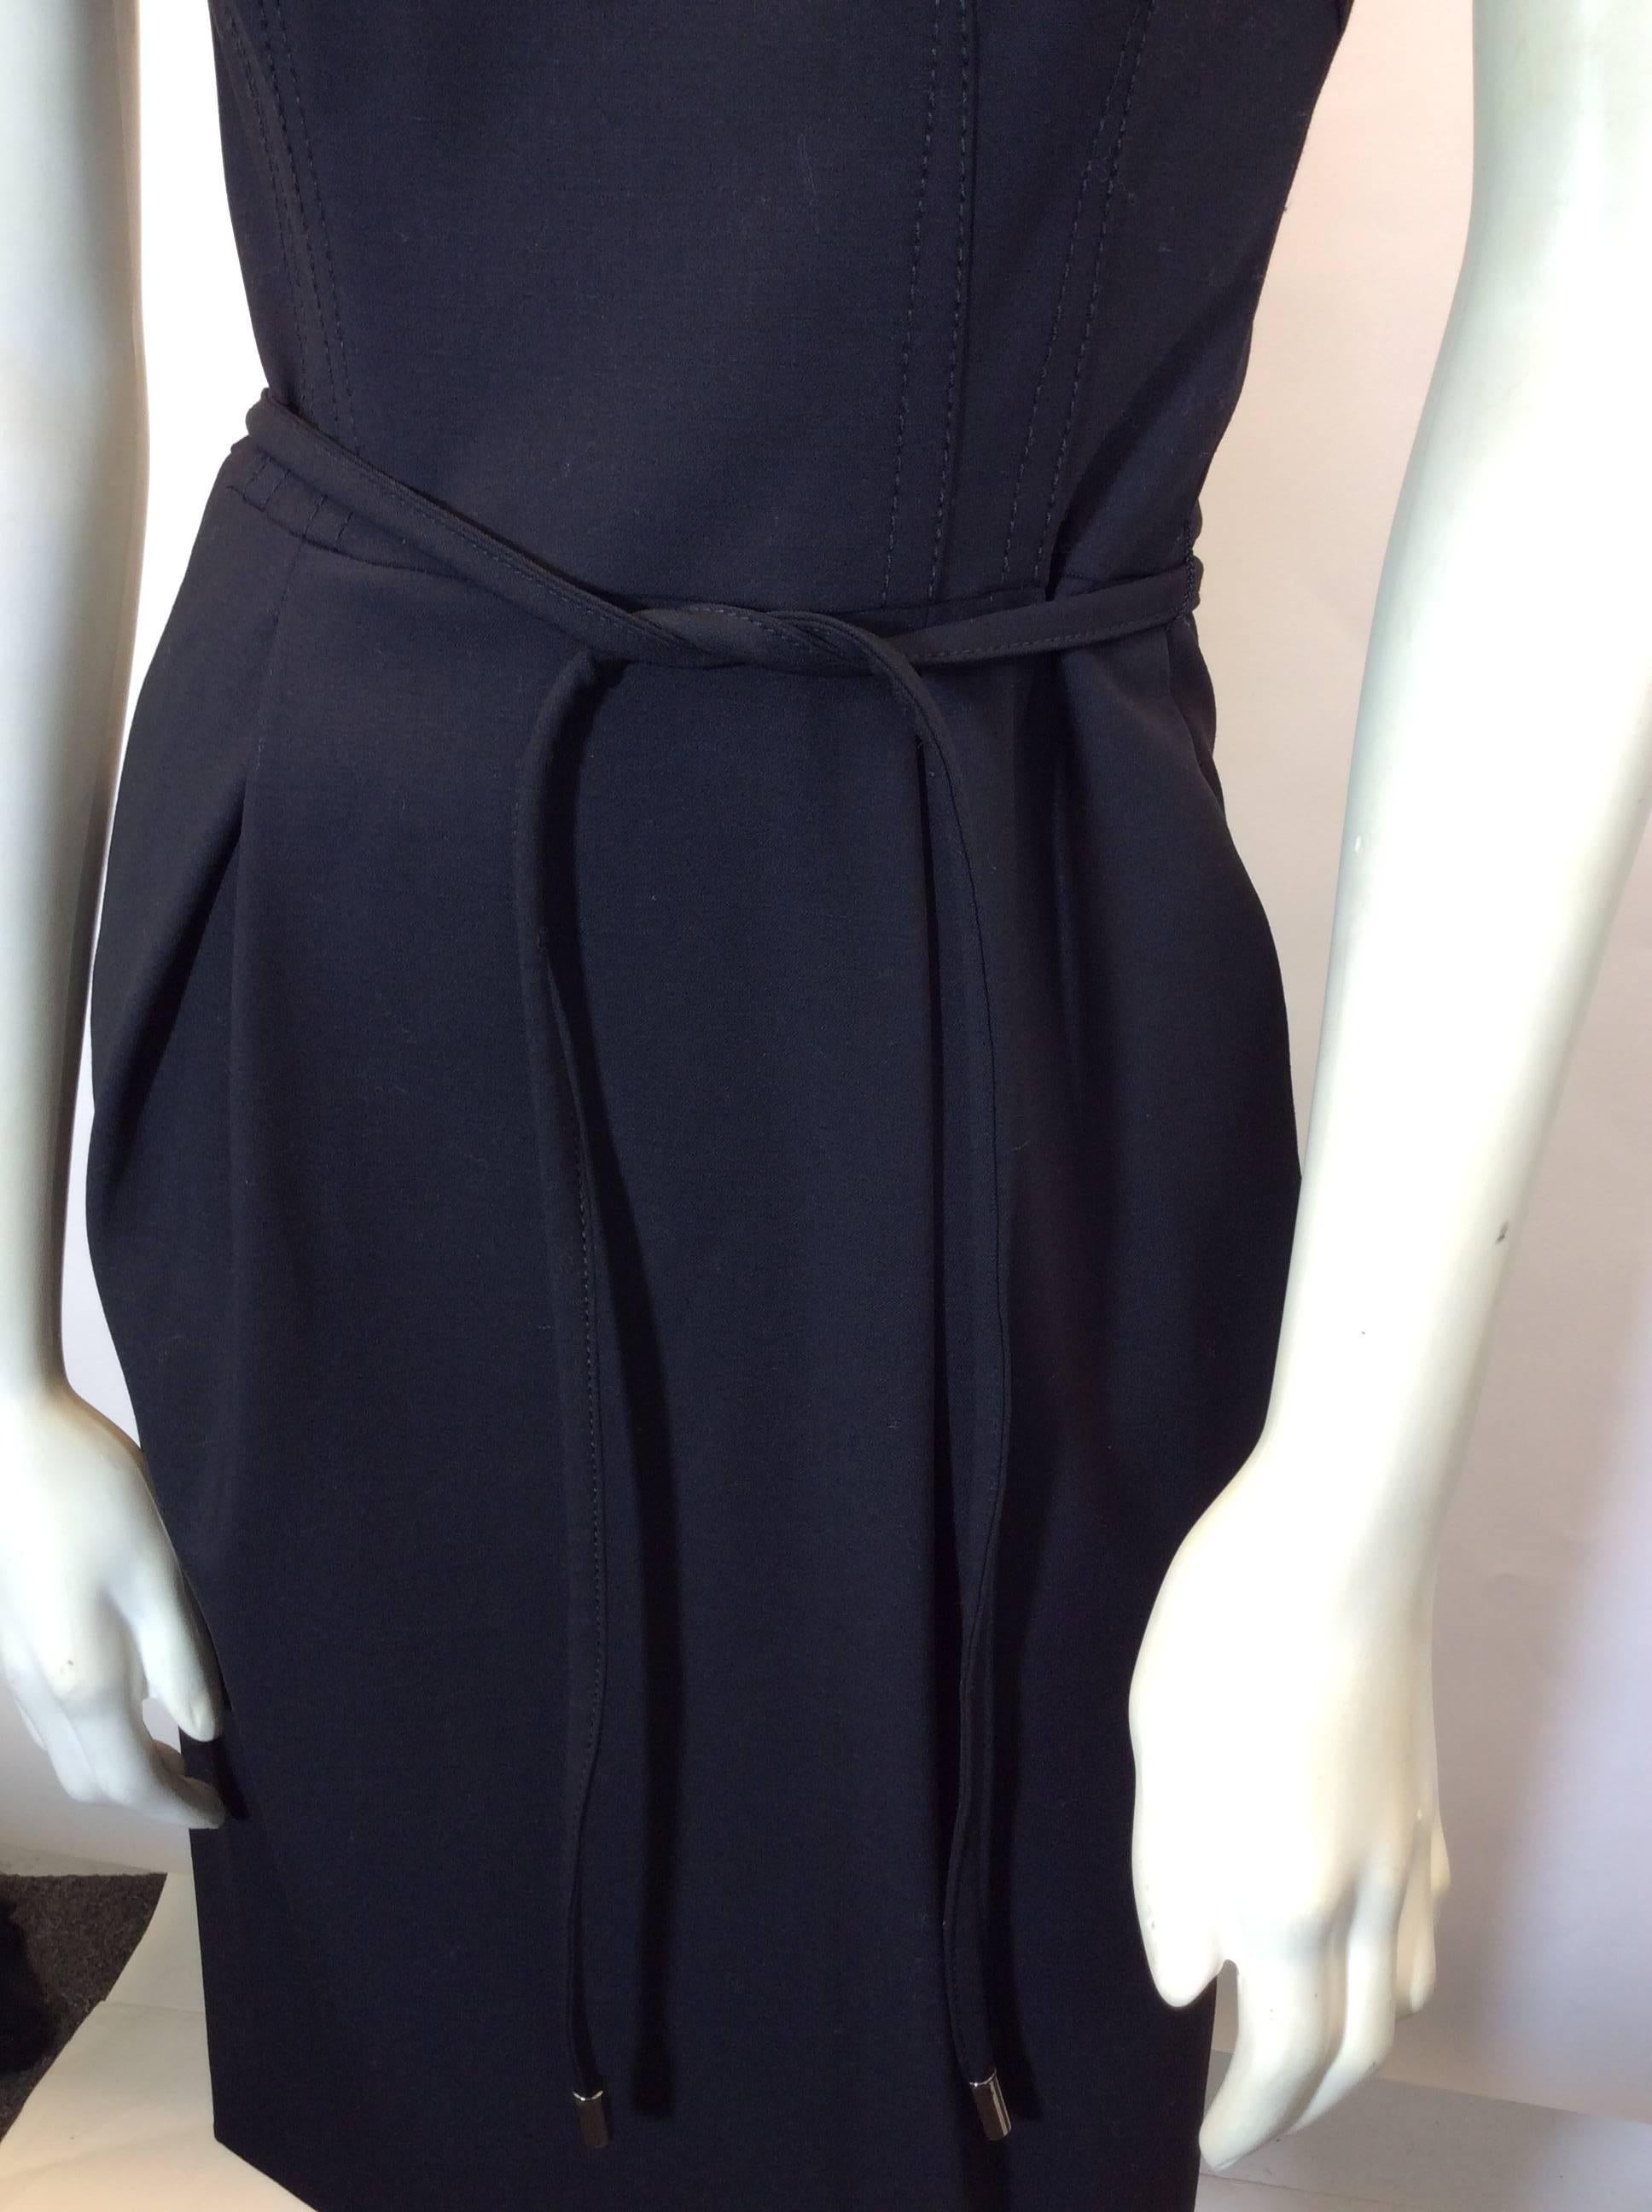 Dolce & Gabbana Black Belted Dress In Excellent Condition For Sale In Narberth, PA